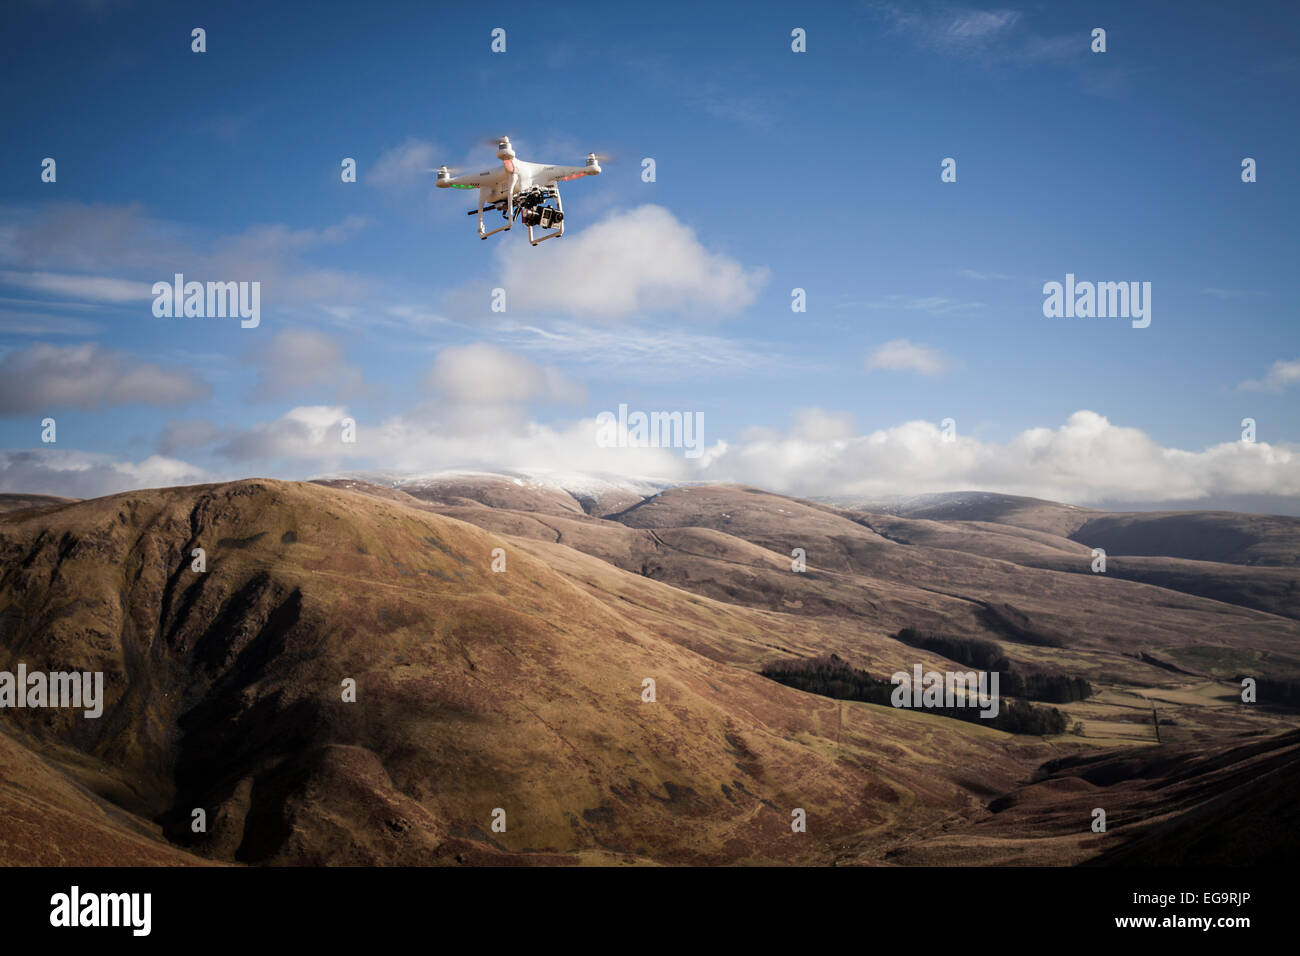 A Drone hovers above a scenic backdrop on a sunny day Stock Photo